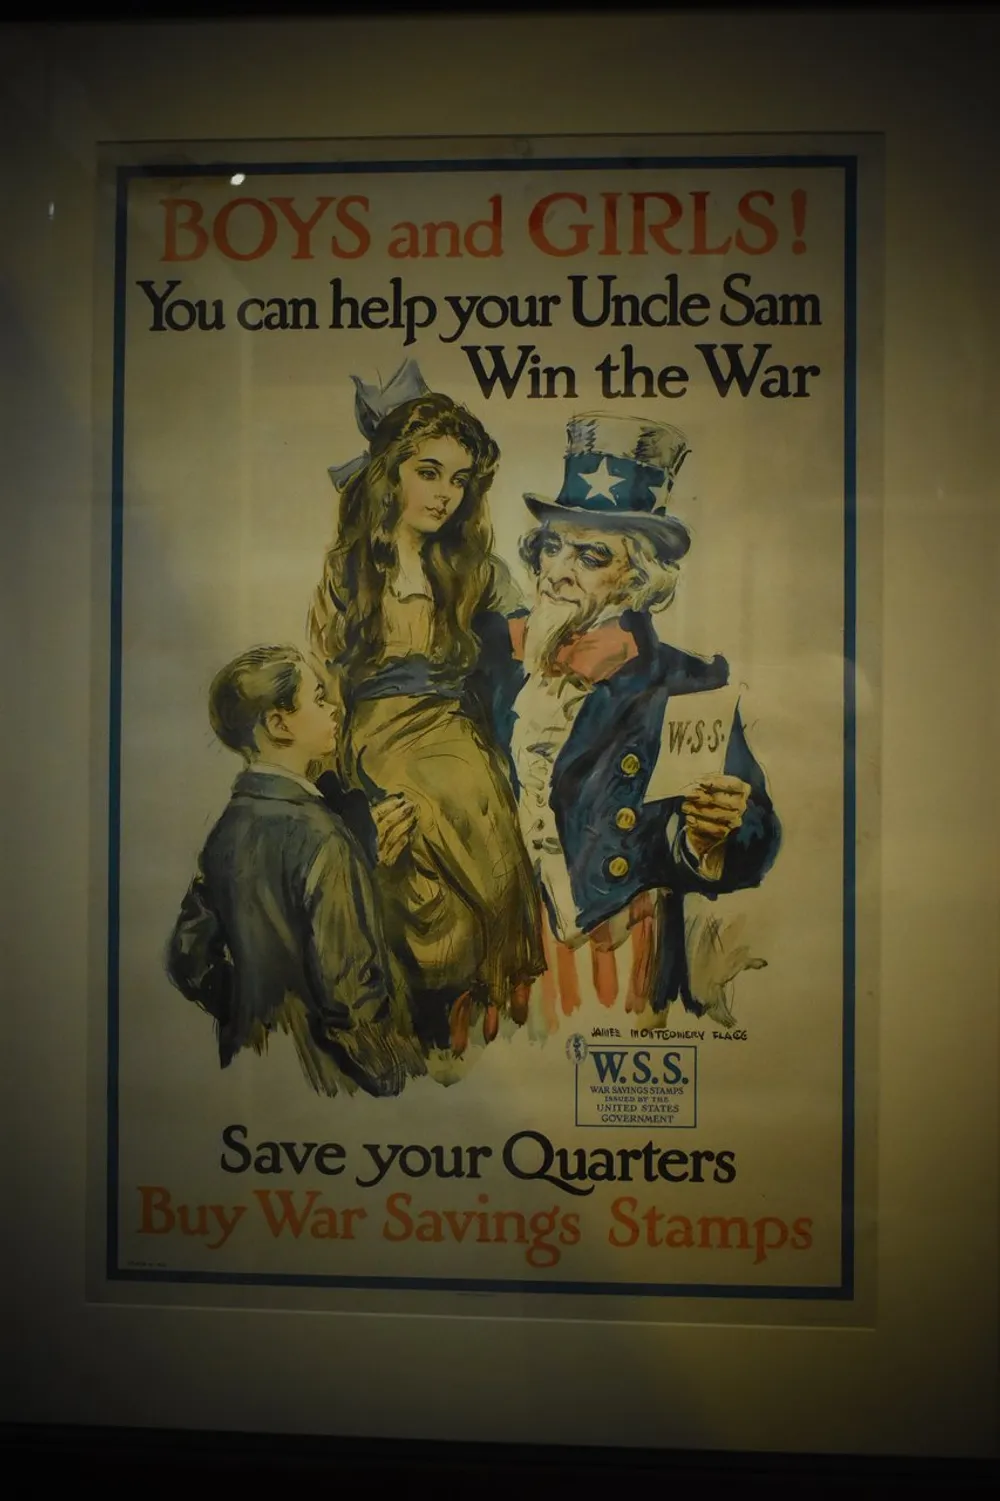 The image shows a vintage World War I-era propaganda poster encouraging boys and girls to buy War Savings Stamps to help Uncle Sam win the war illustrated with a young girl a small boy looking up to Uncle Sam who is holding a book of stamps